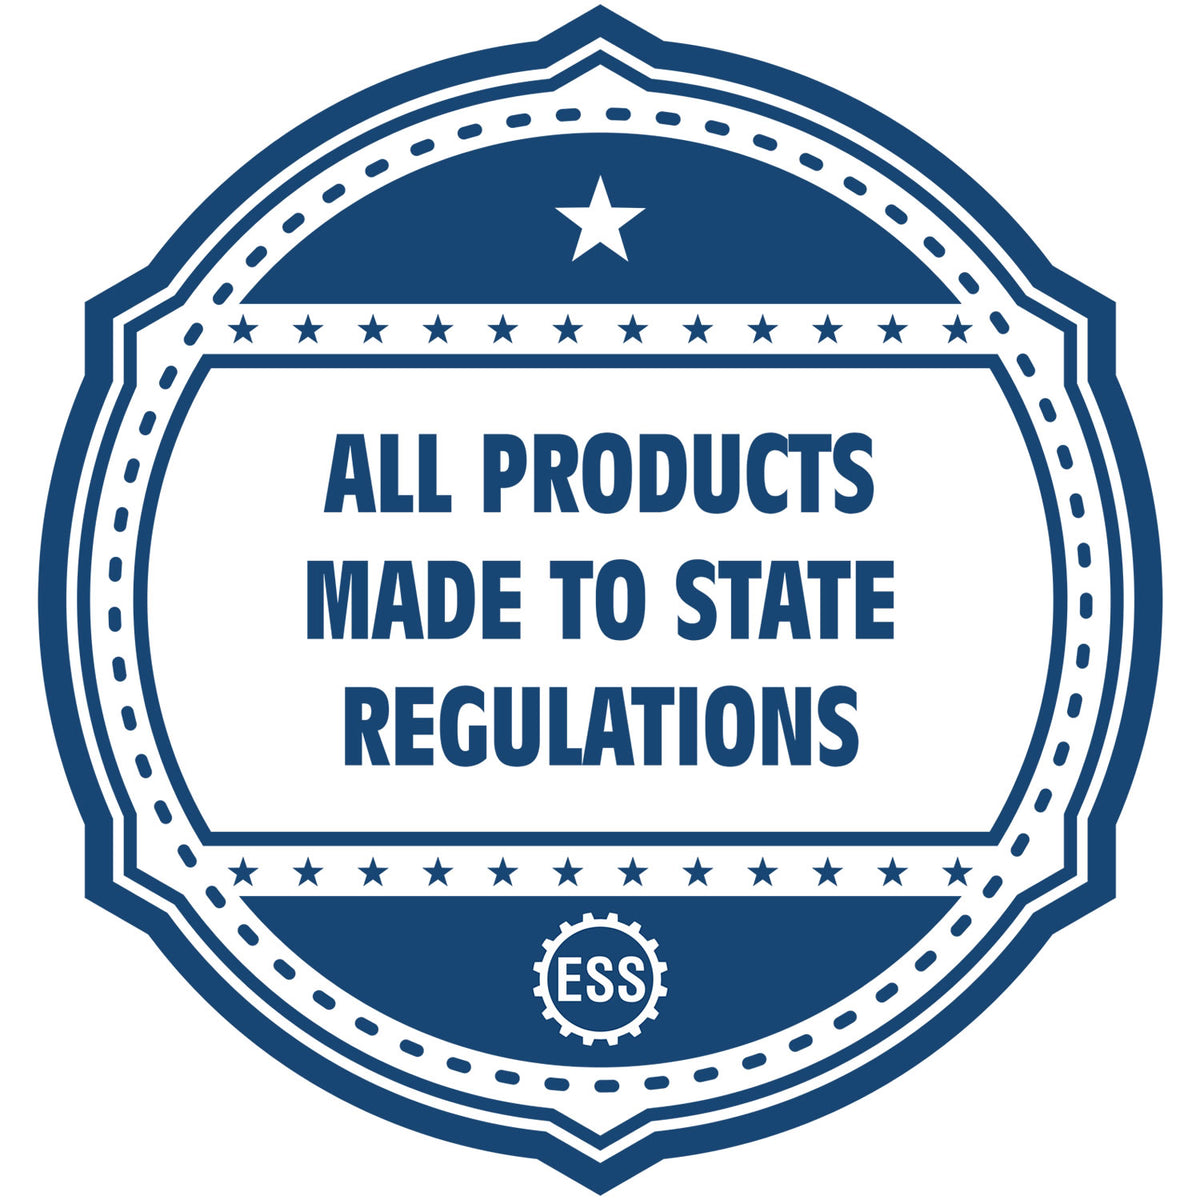 An icon or badge element for the Hawaii Desk Architect Embossing Seal showing that this product is made in compliance with state regulations.